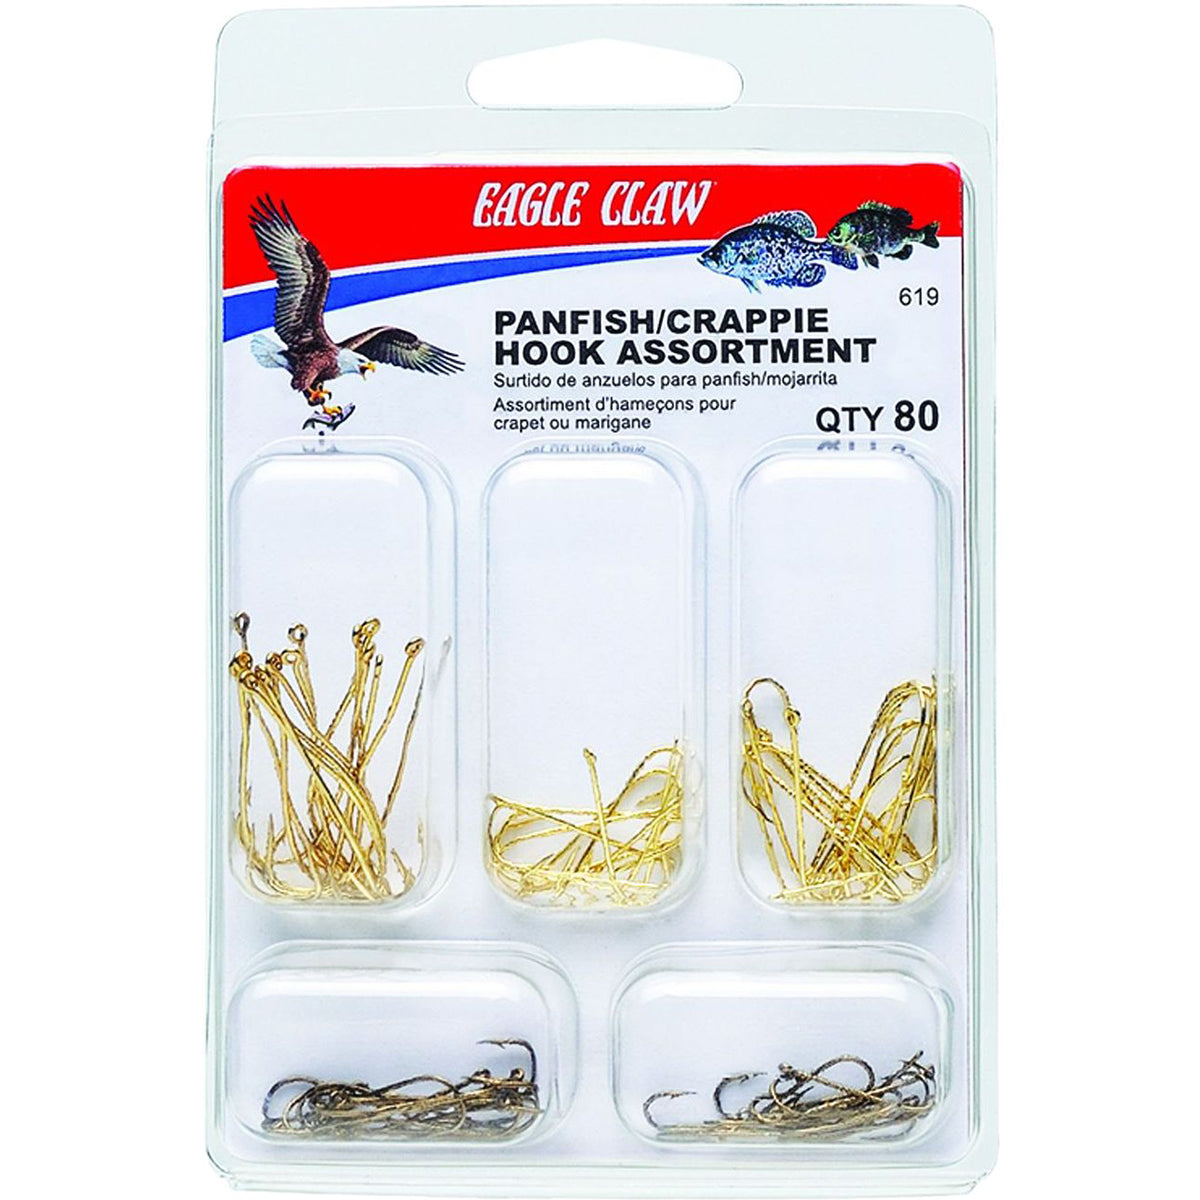 Eagle Claw - Fish Mouth Spreader